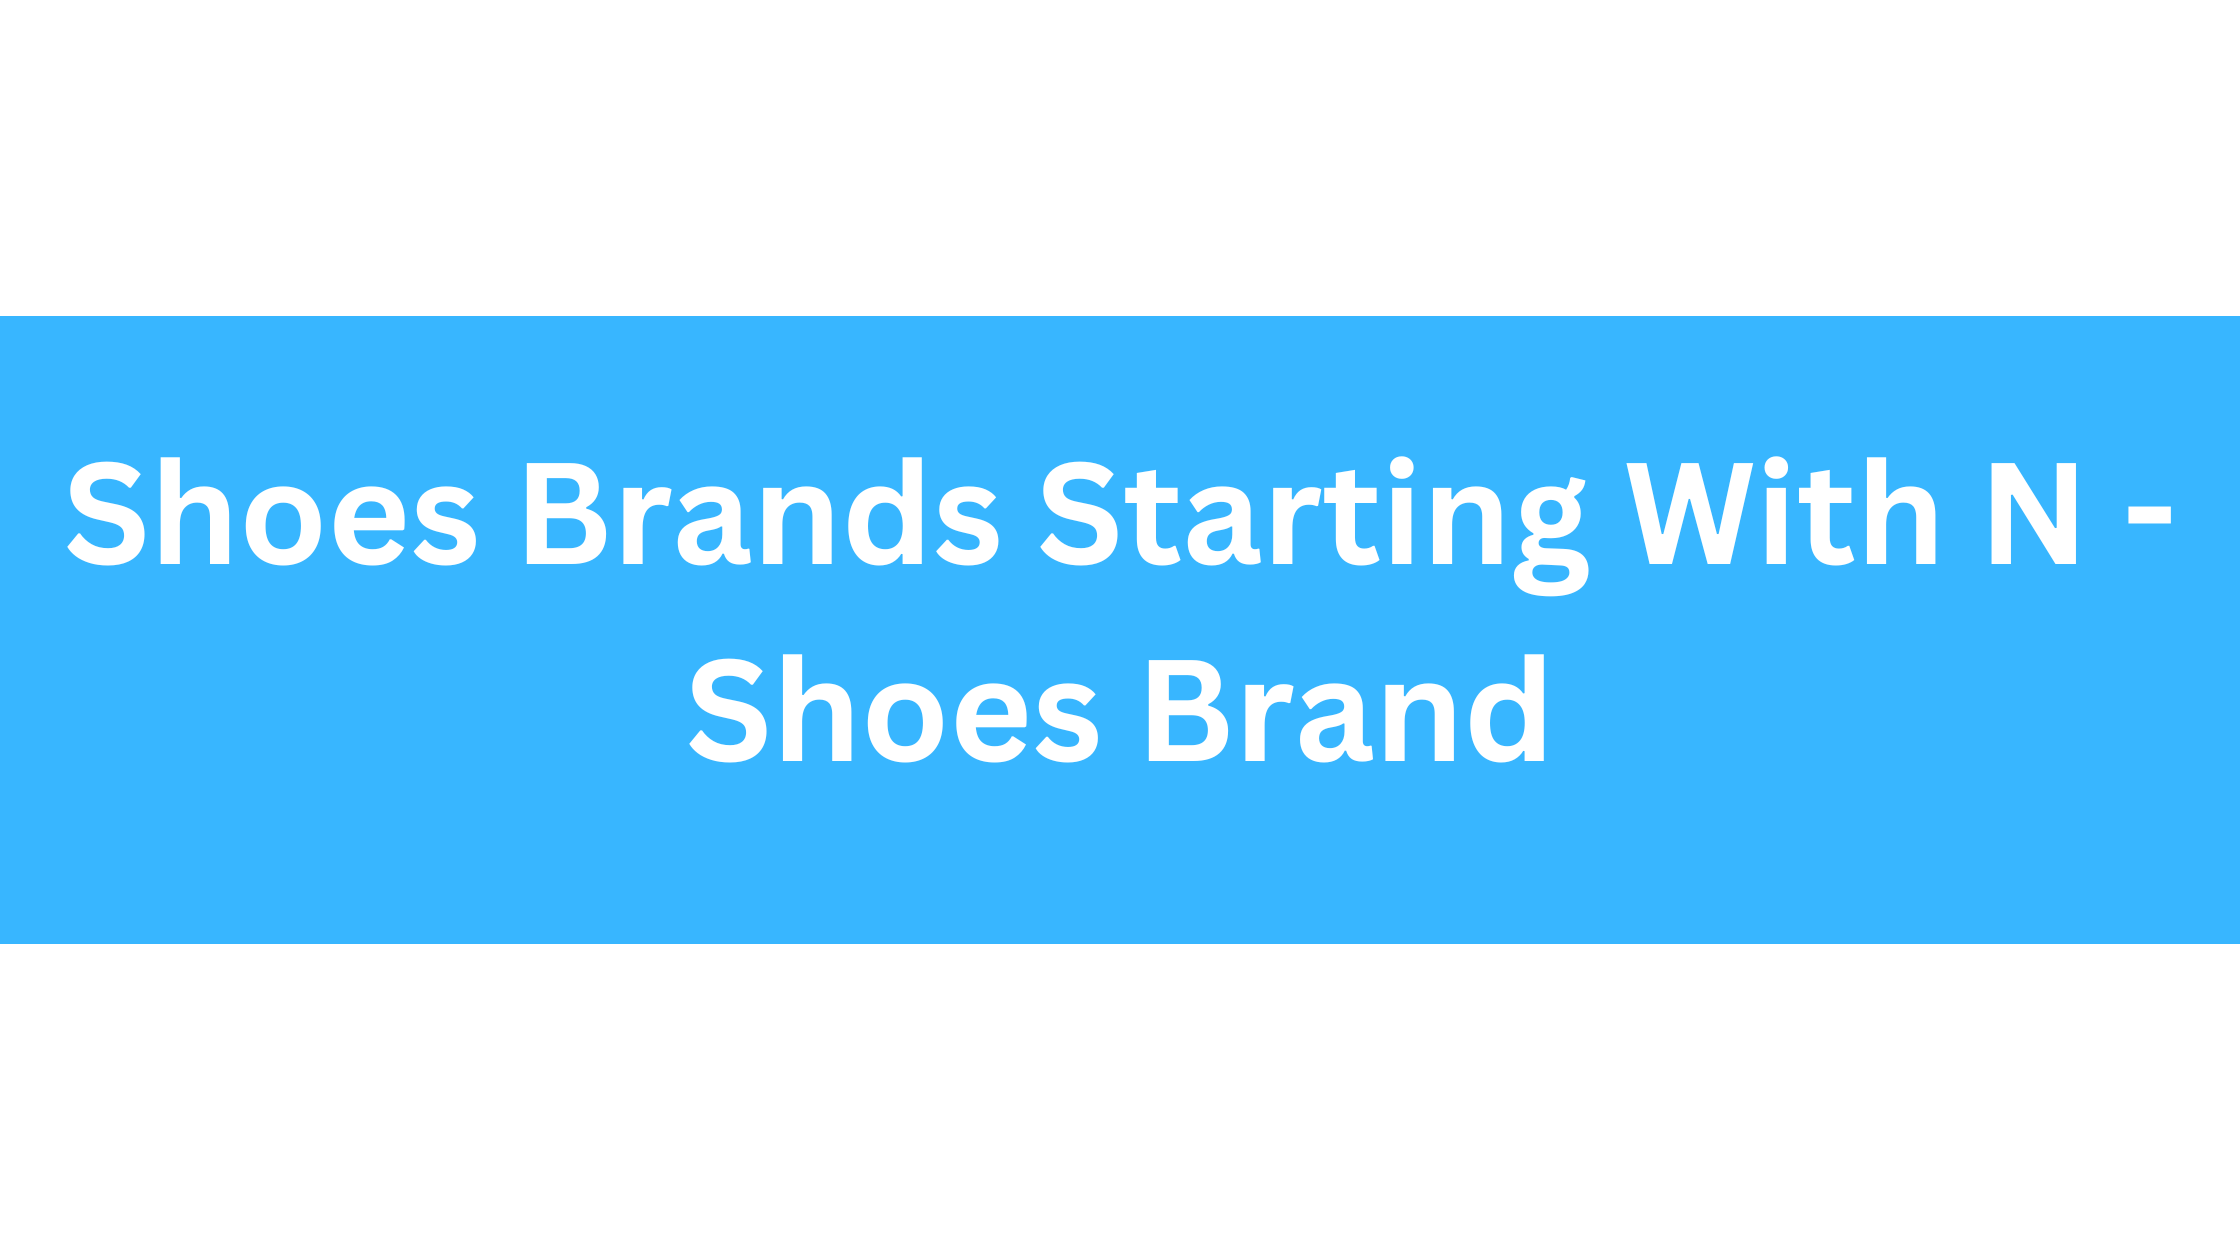 Shoes Brands Starting With N